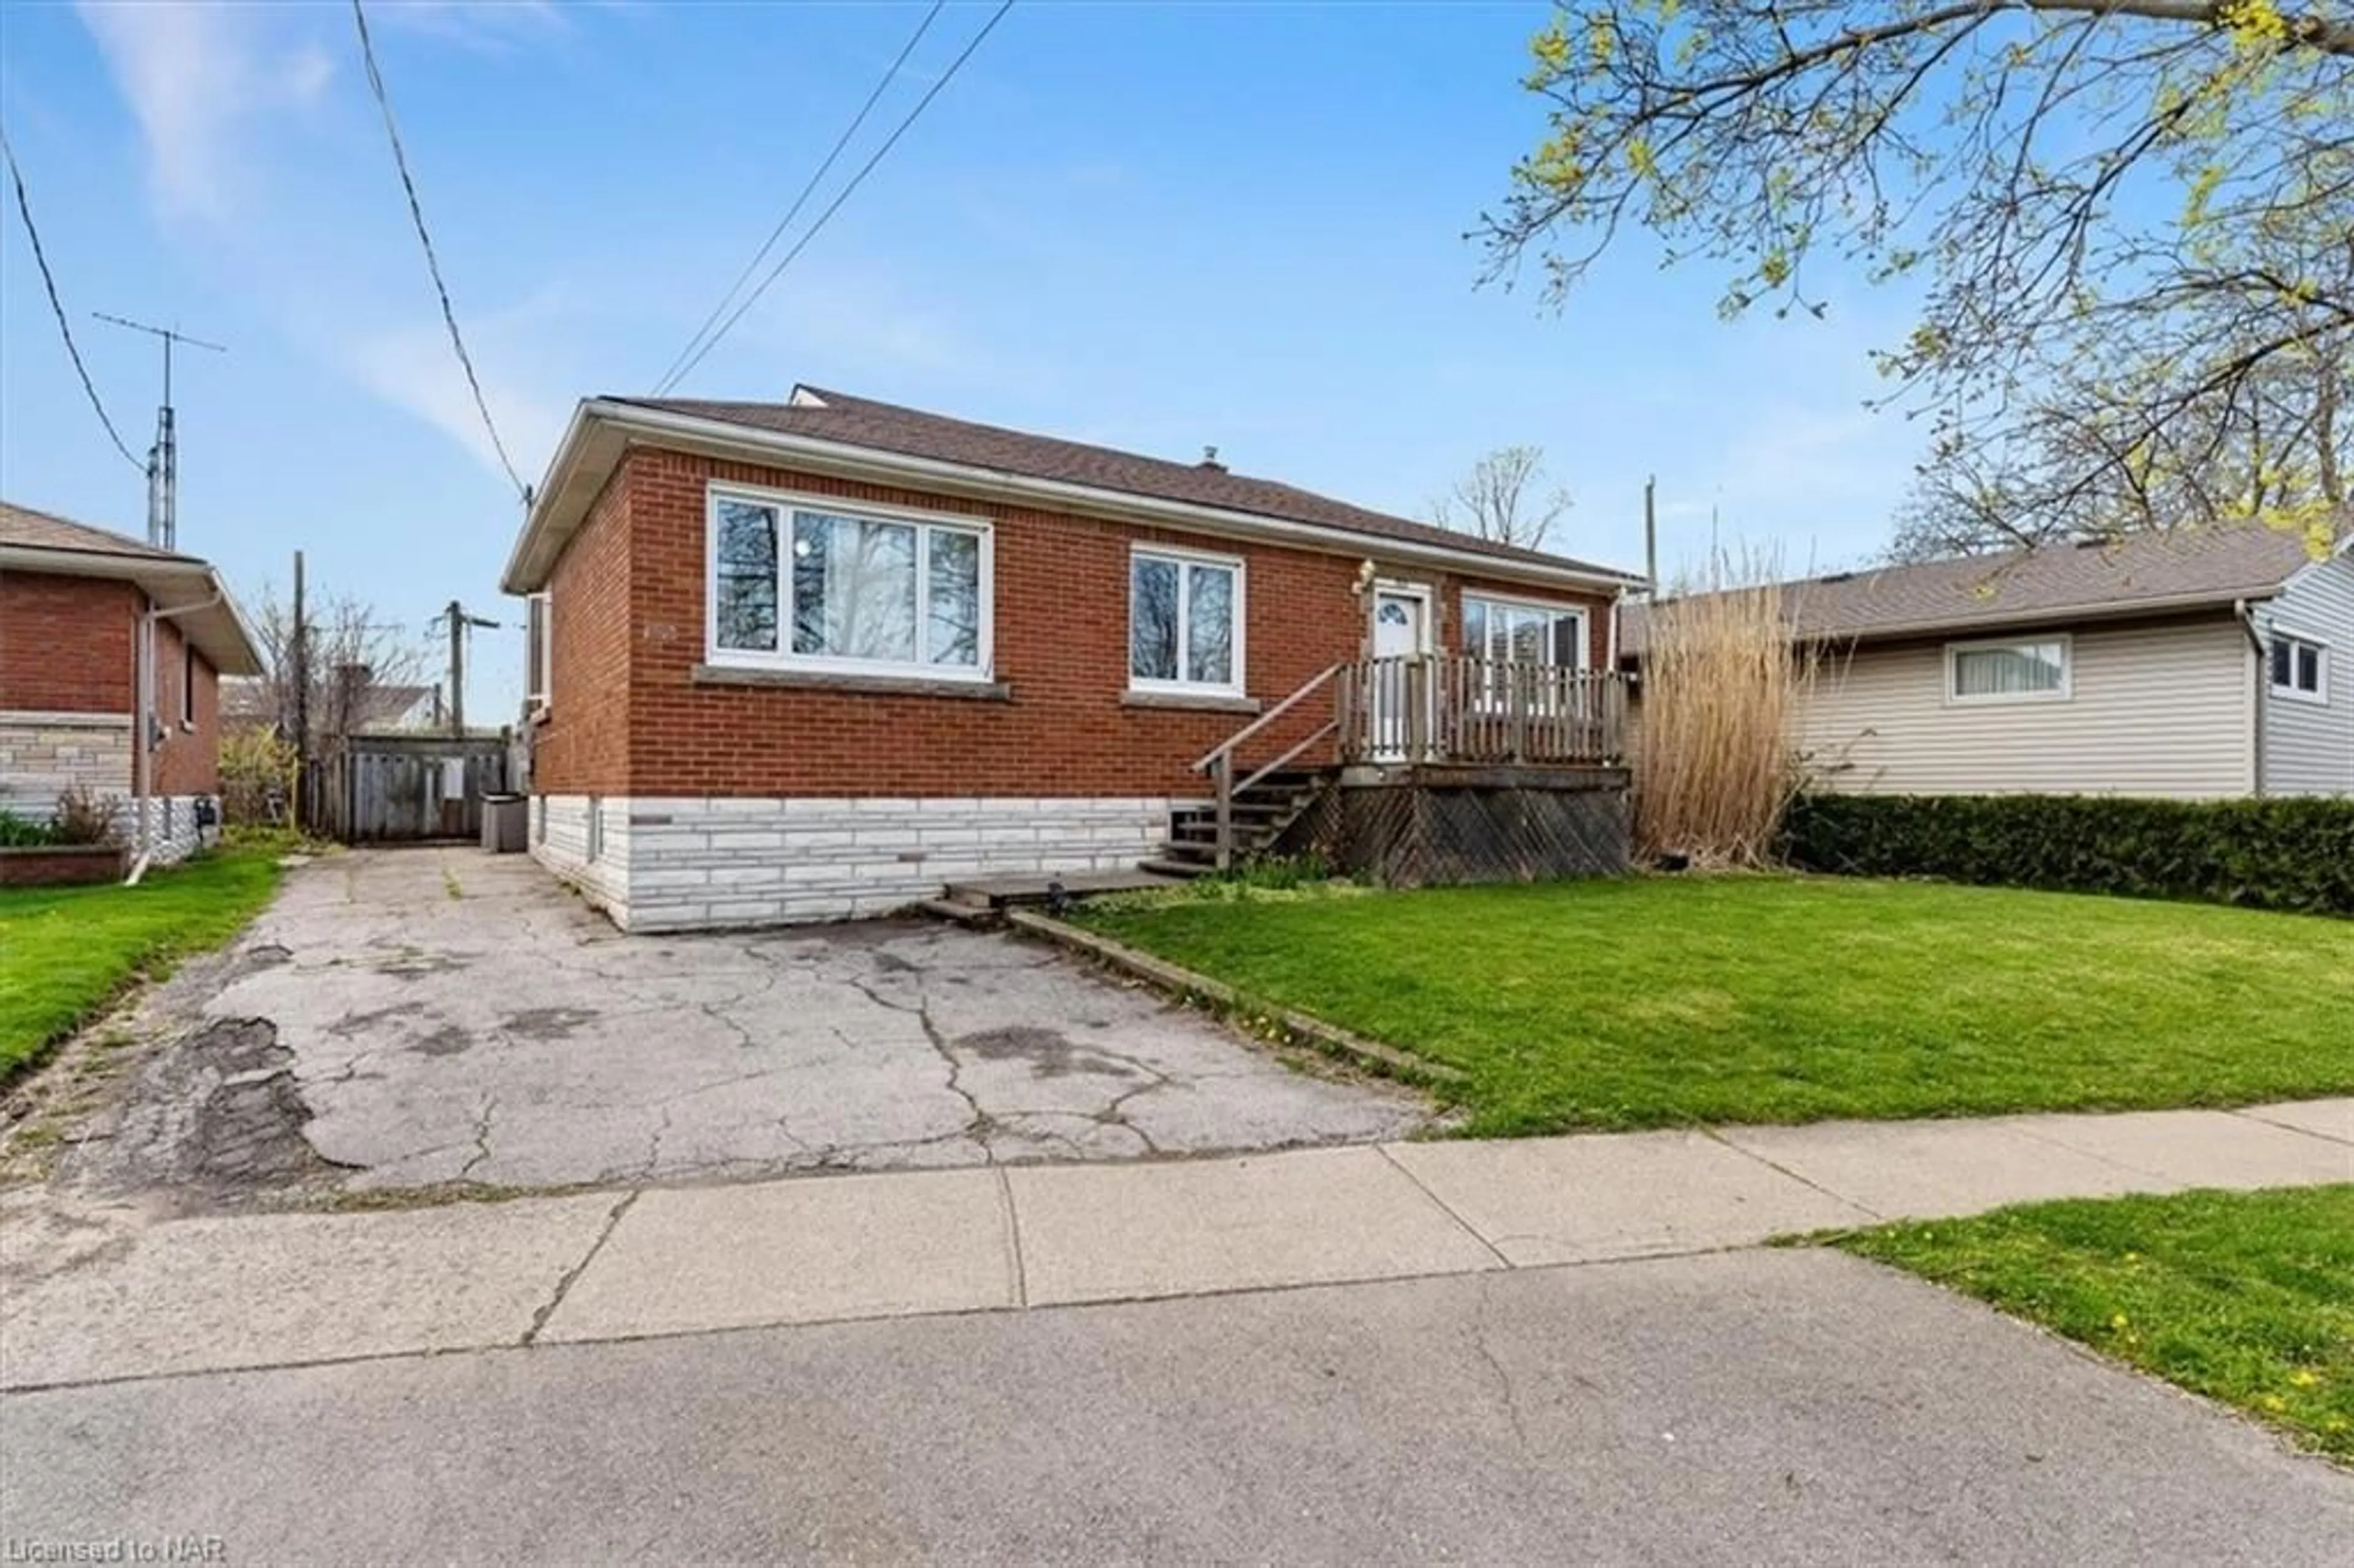 Frontside or backside of a home for 303 Grantham Ave, St. Catharines Ontario L2M 5A3